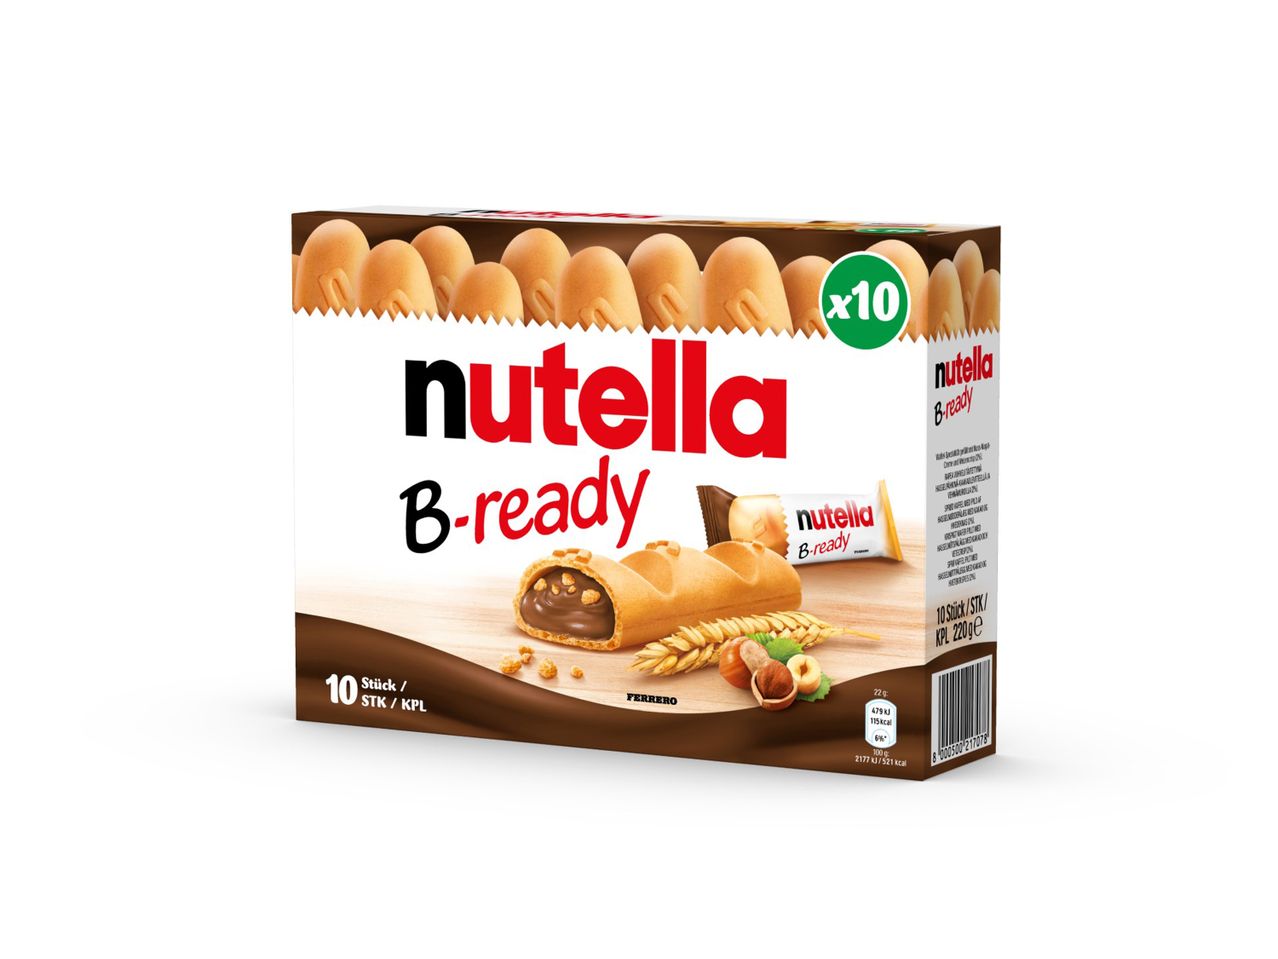 Go to full screen view: Nutella B-ready - Image 1